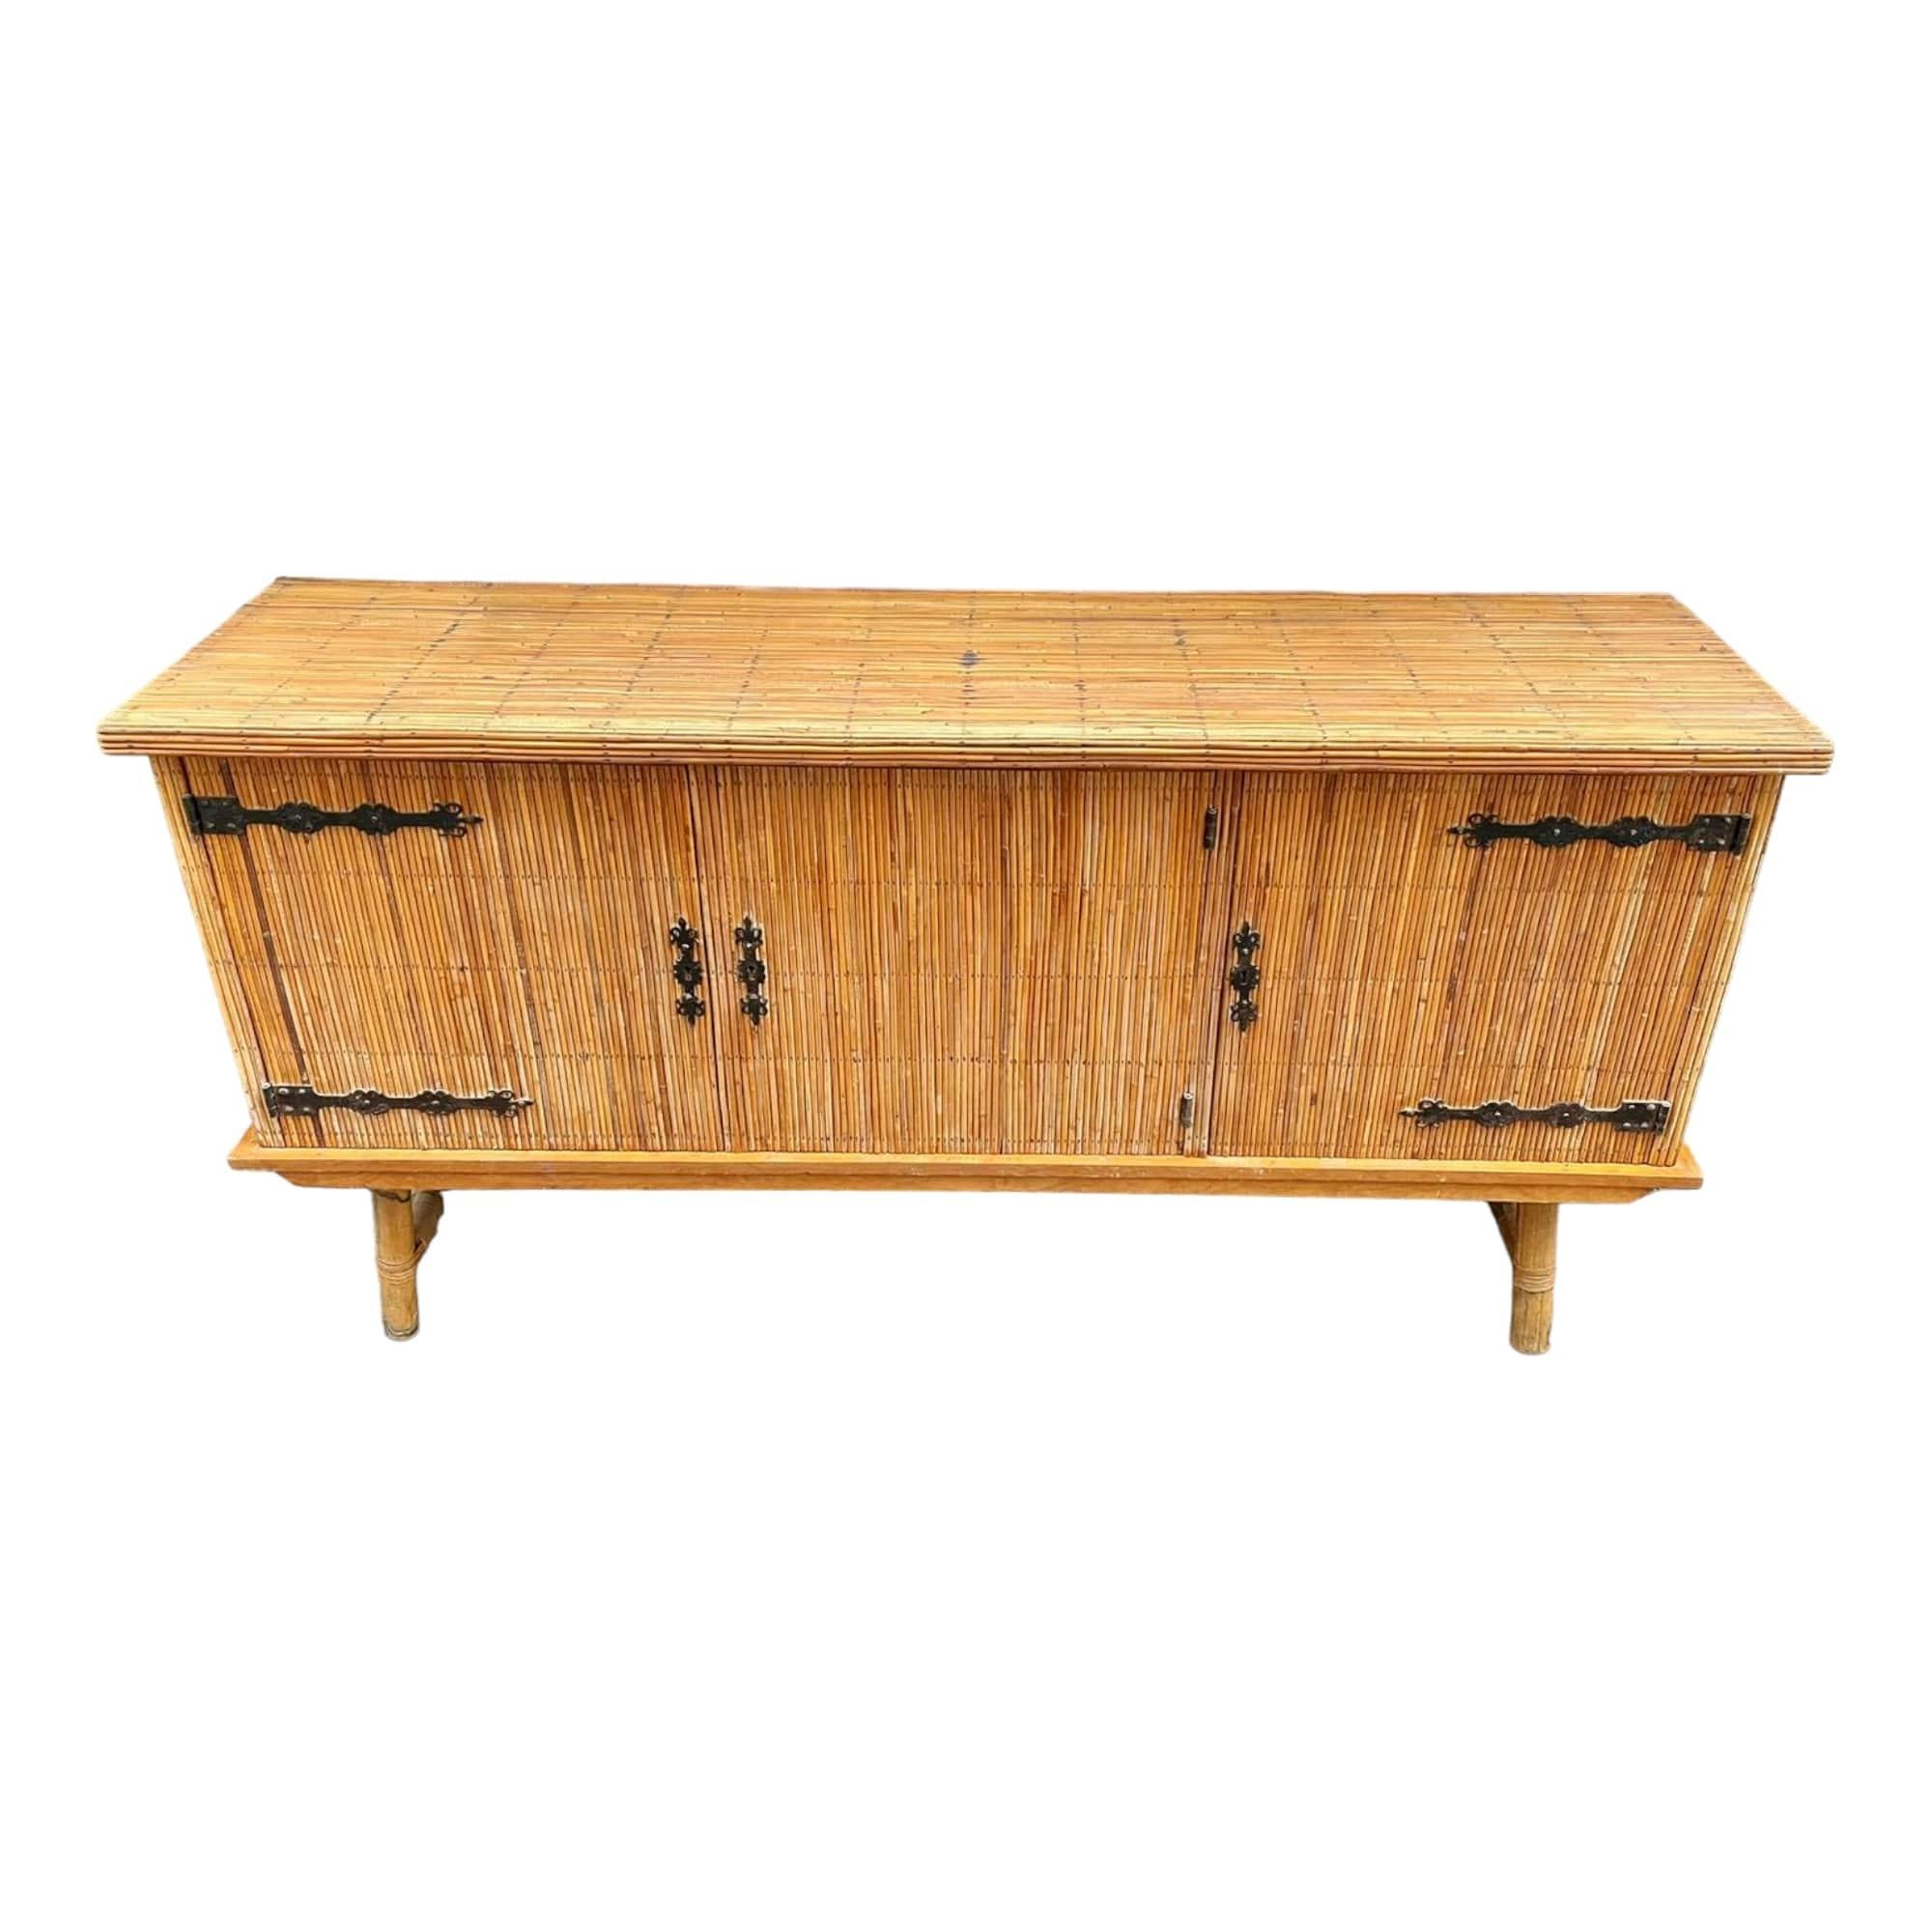 This bamboo sideboard attributed to Audoux Minet is a true piece of French antique, dating from the 1950s. Its design is simply superb and will bring a touch of elegance to any interior. Carefully crafted, this split bamboo sideboard is both sturdy